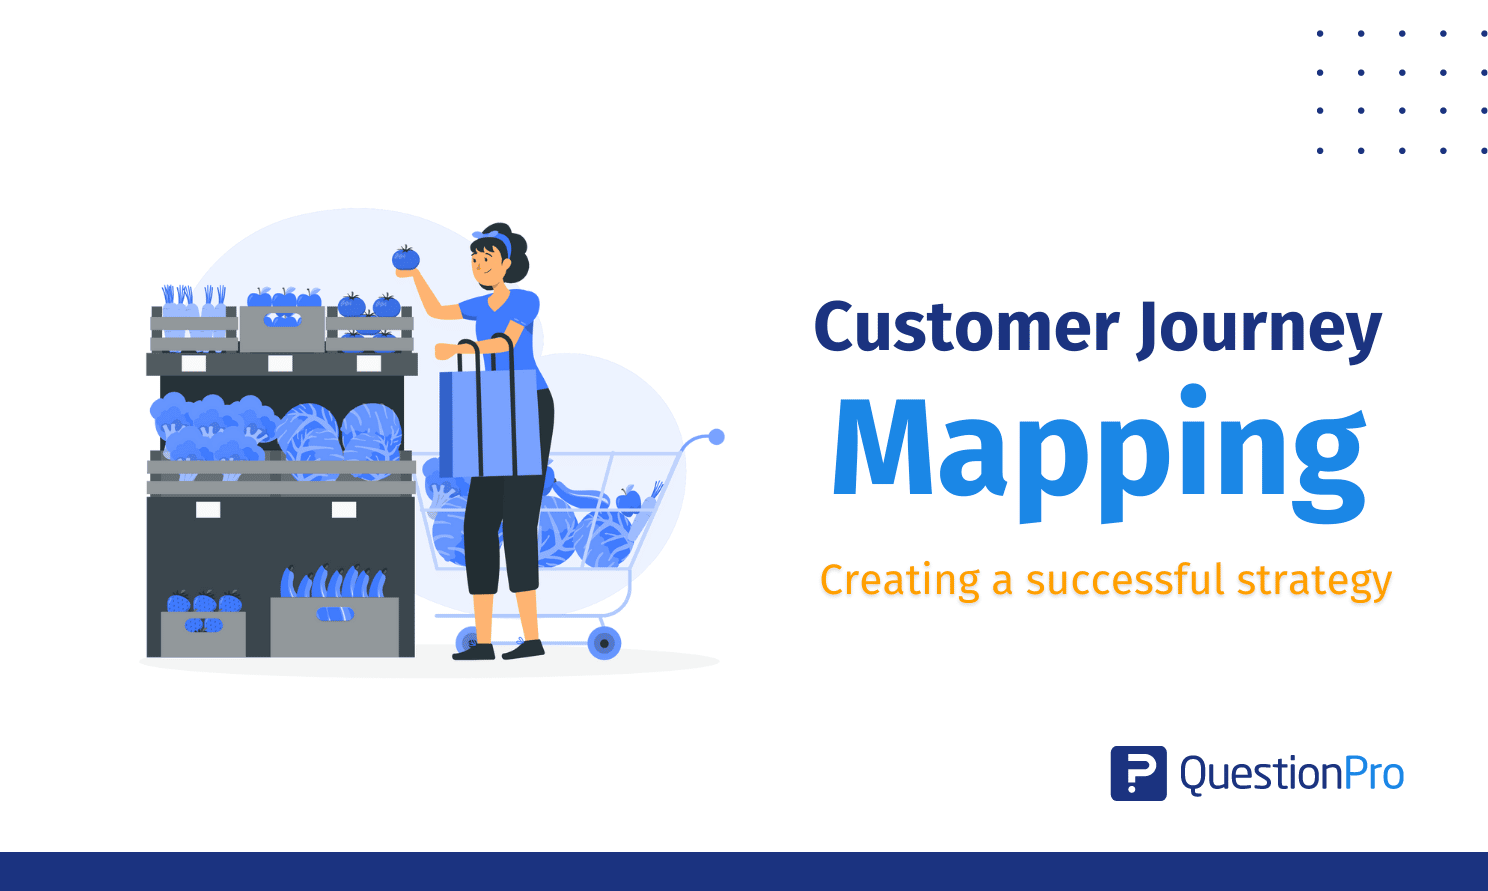 Customer Journey Mapping: Creating a successful strategy